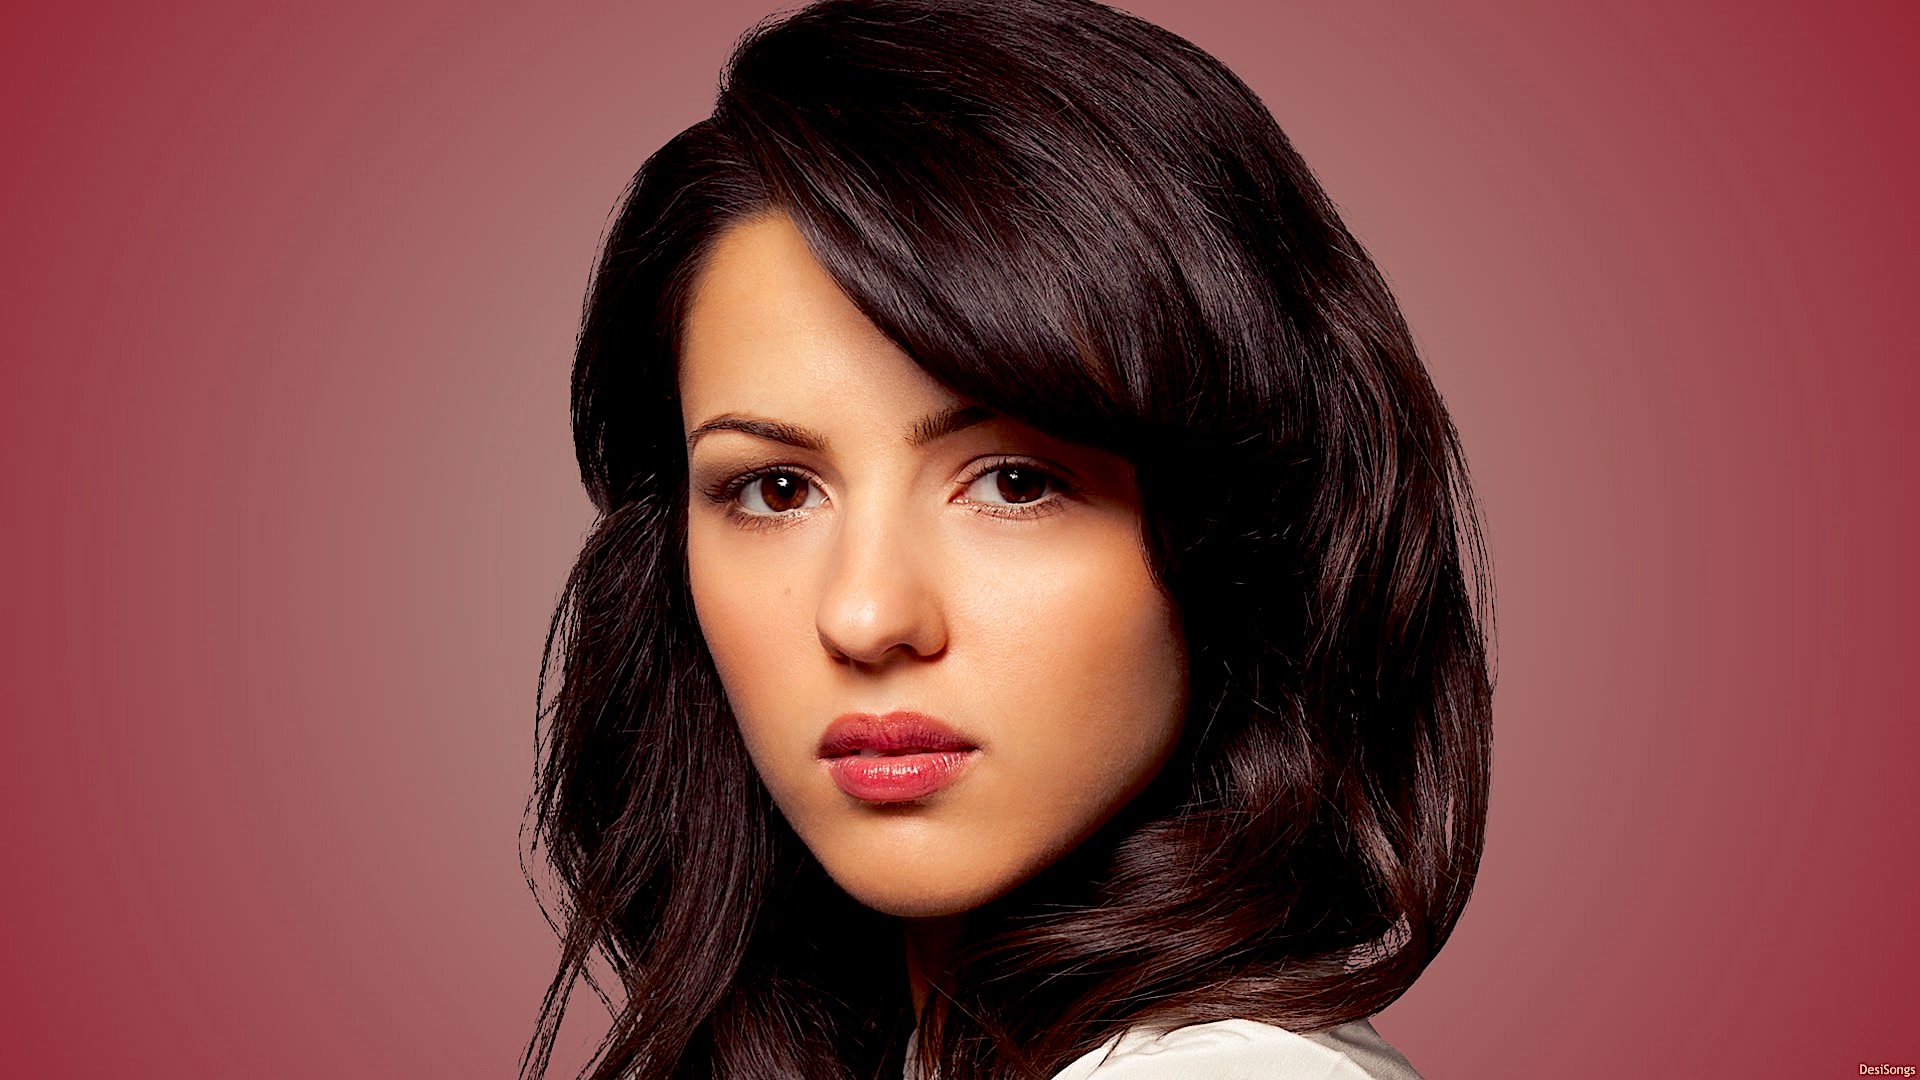 Annet Mahendru Images. 